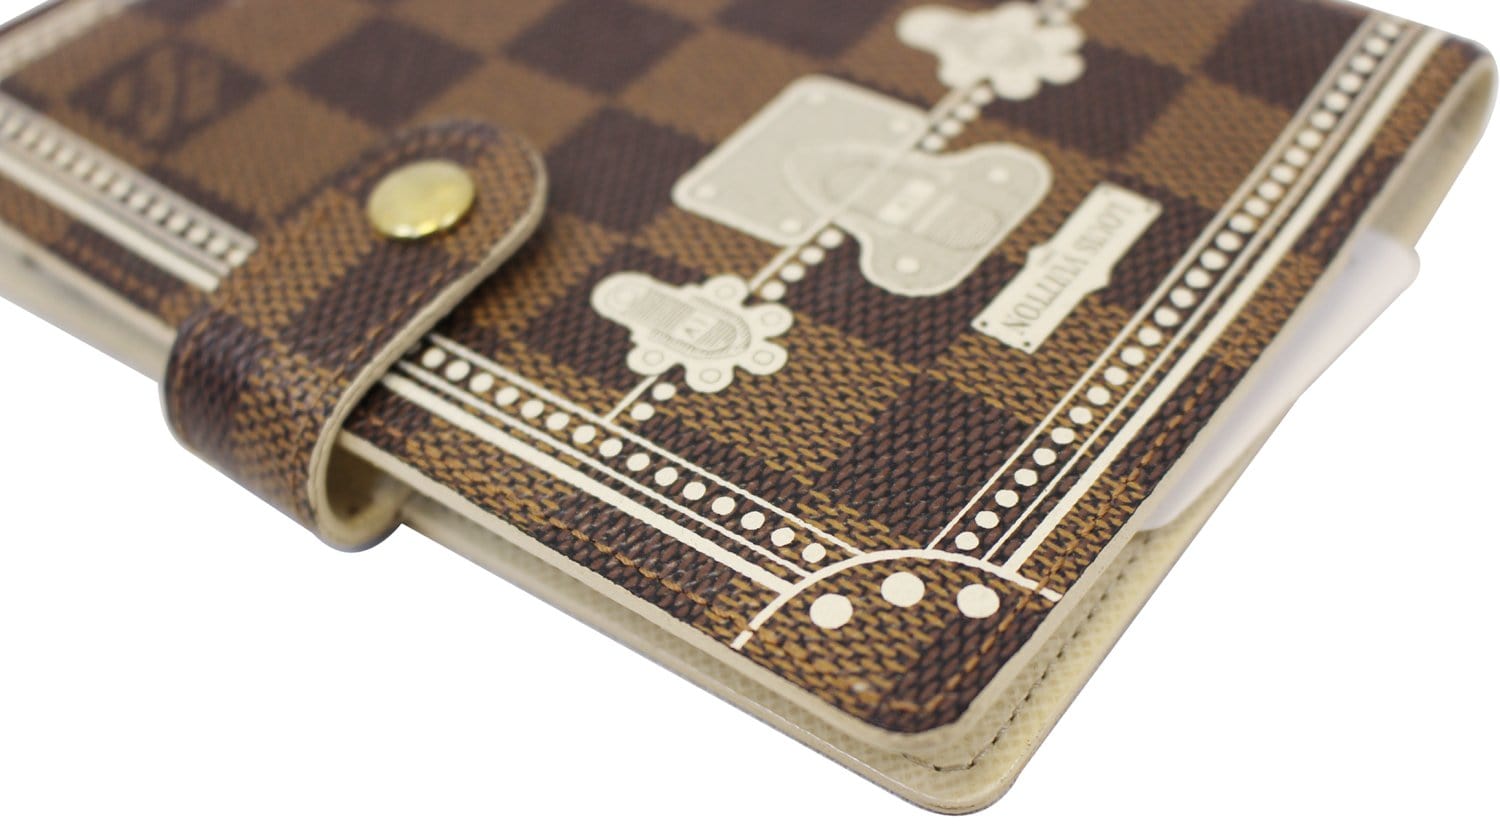 Beautiful Calendar Inserts for Any Agenda, Especially for the Louis Vuitton  Fan